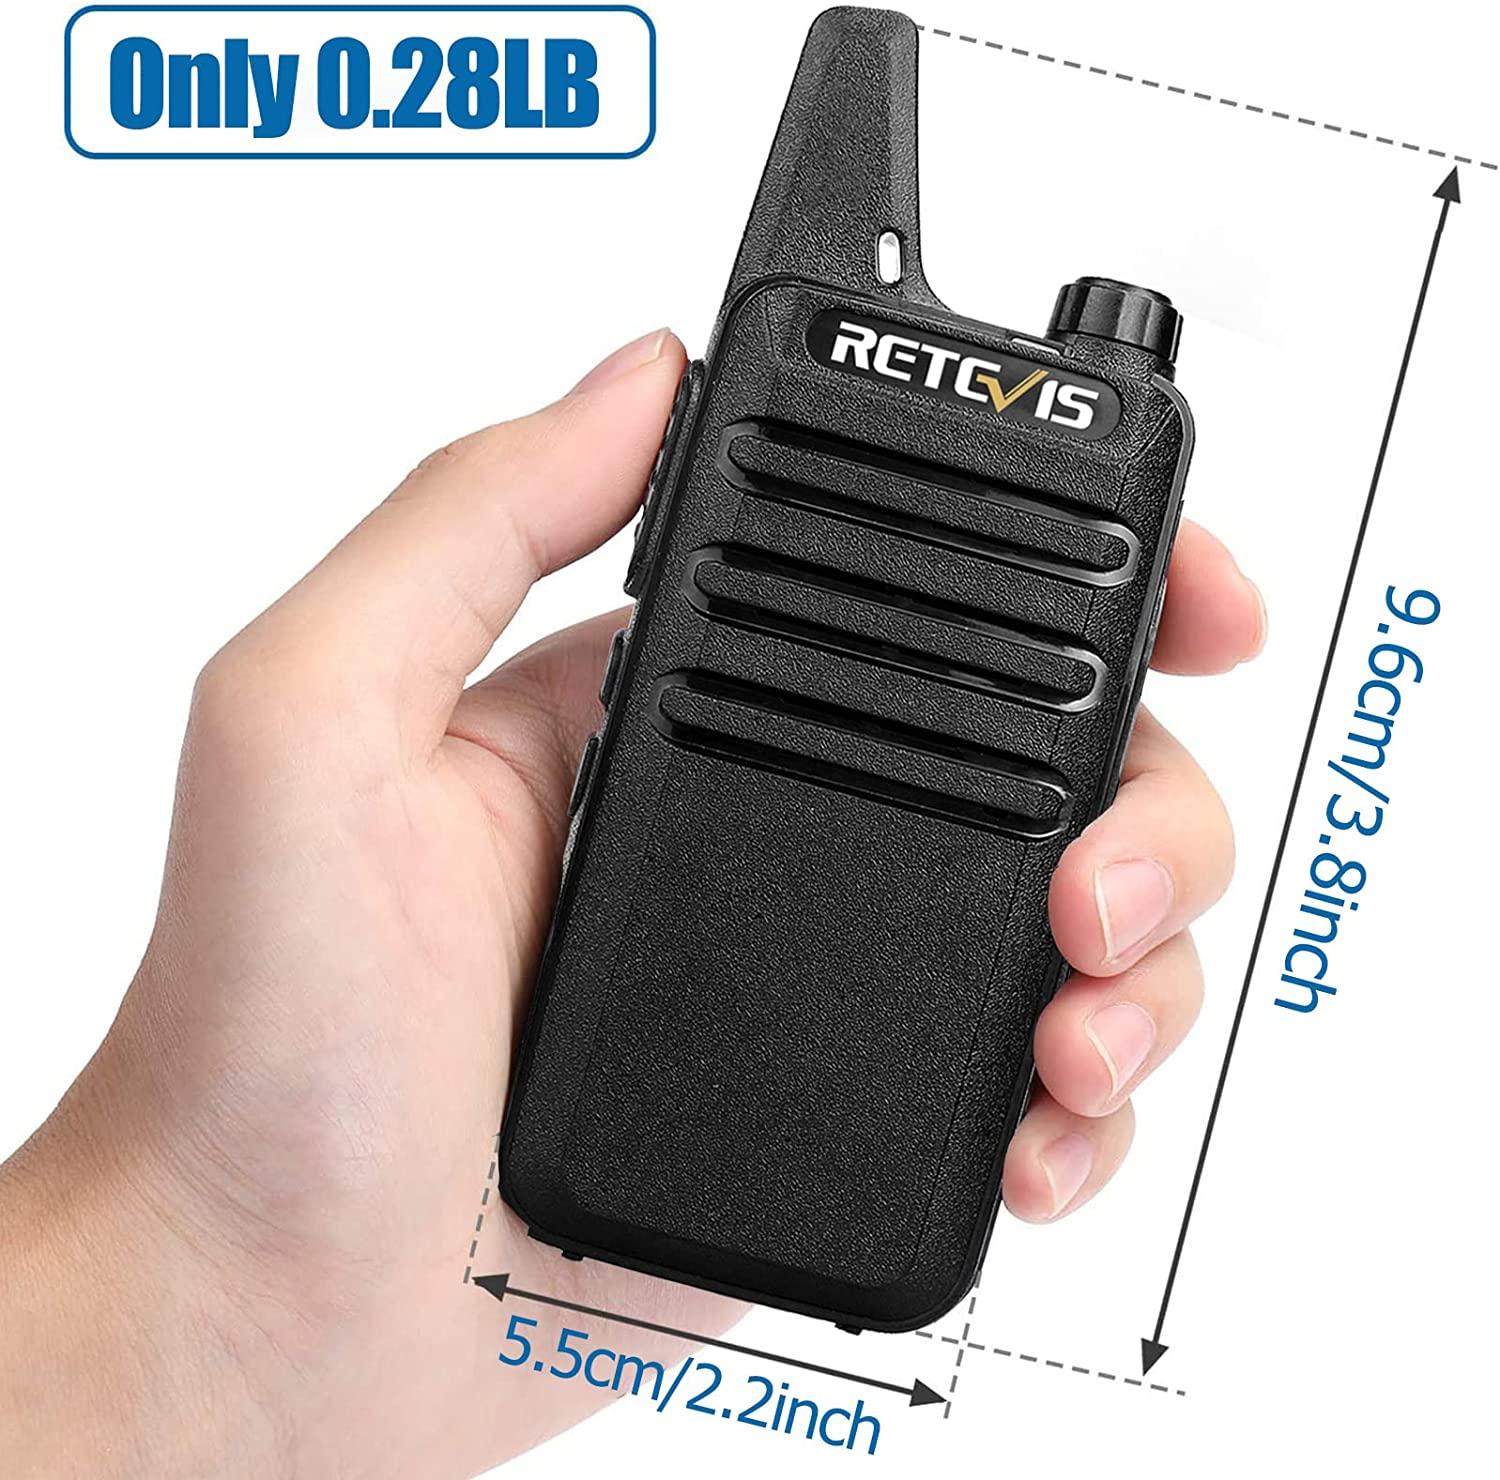 Retevis RT68 Rechargeable Portable 2 Way Radio with Earpiece Kit